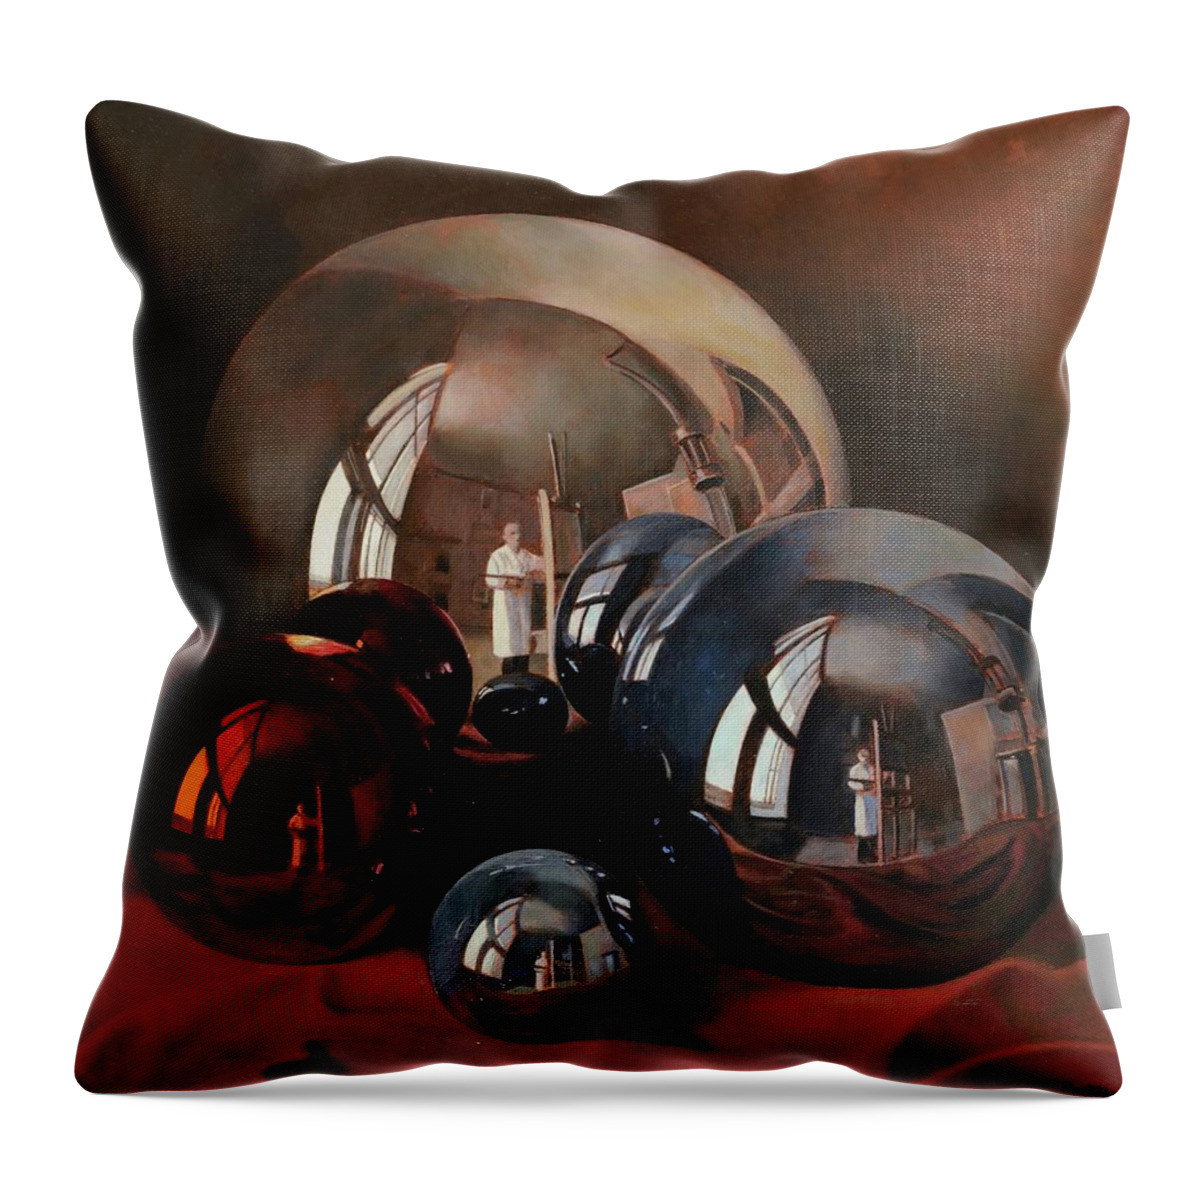 Abstract Throw Pillow featuring the painting Glass Balls by Theodor Barth